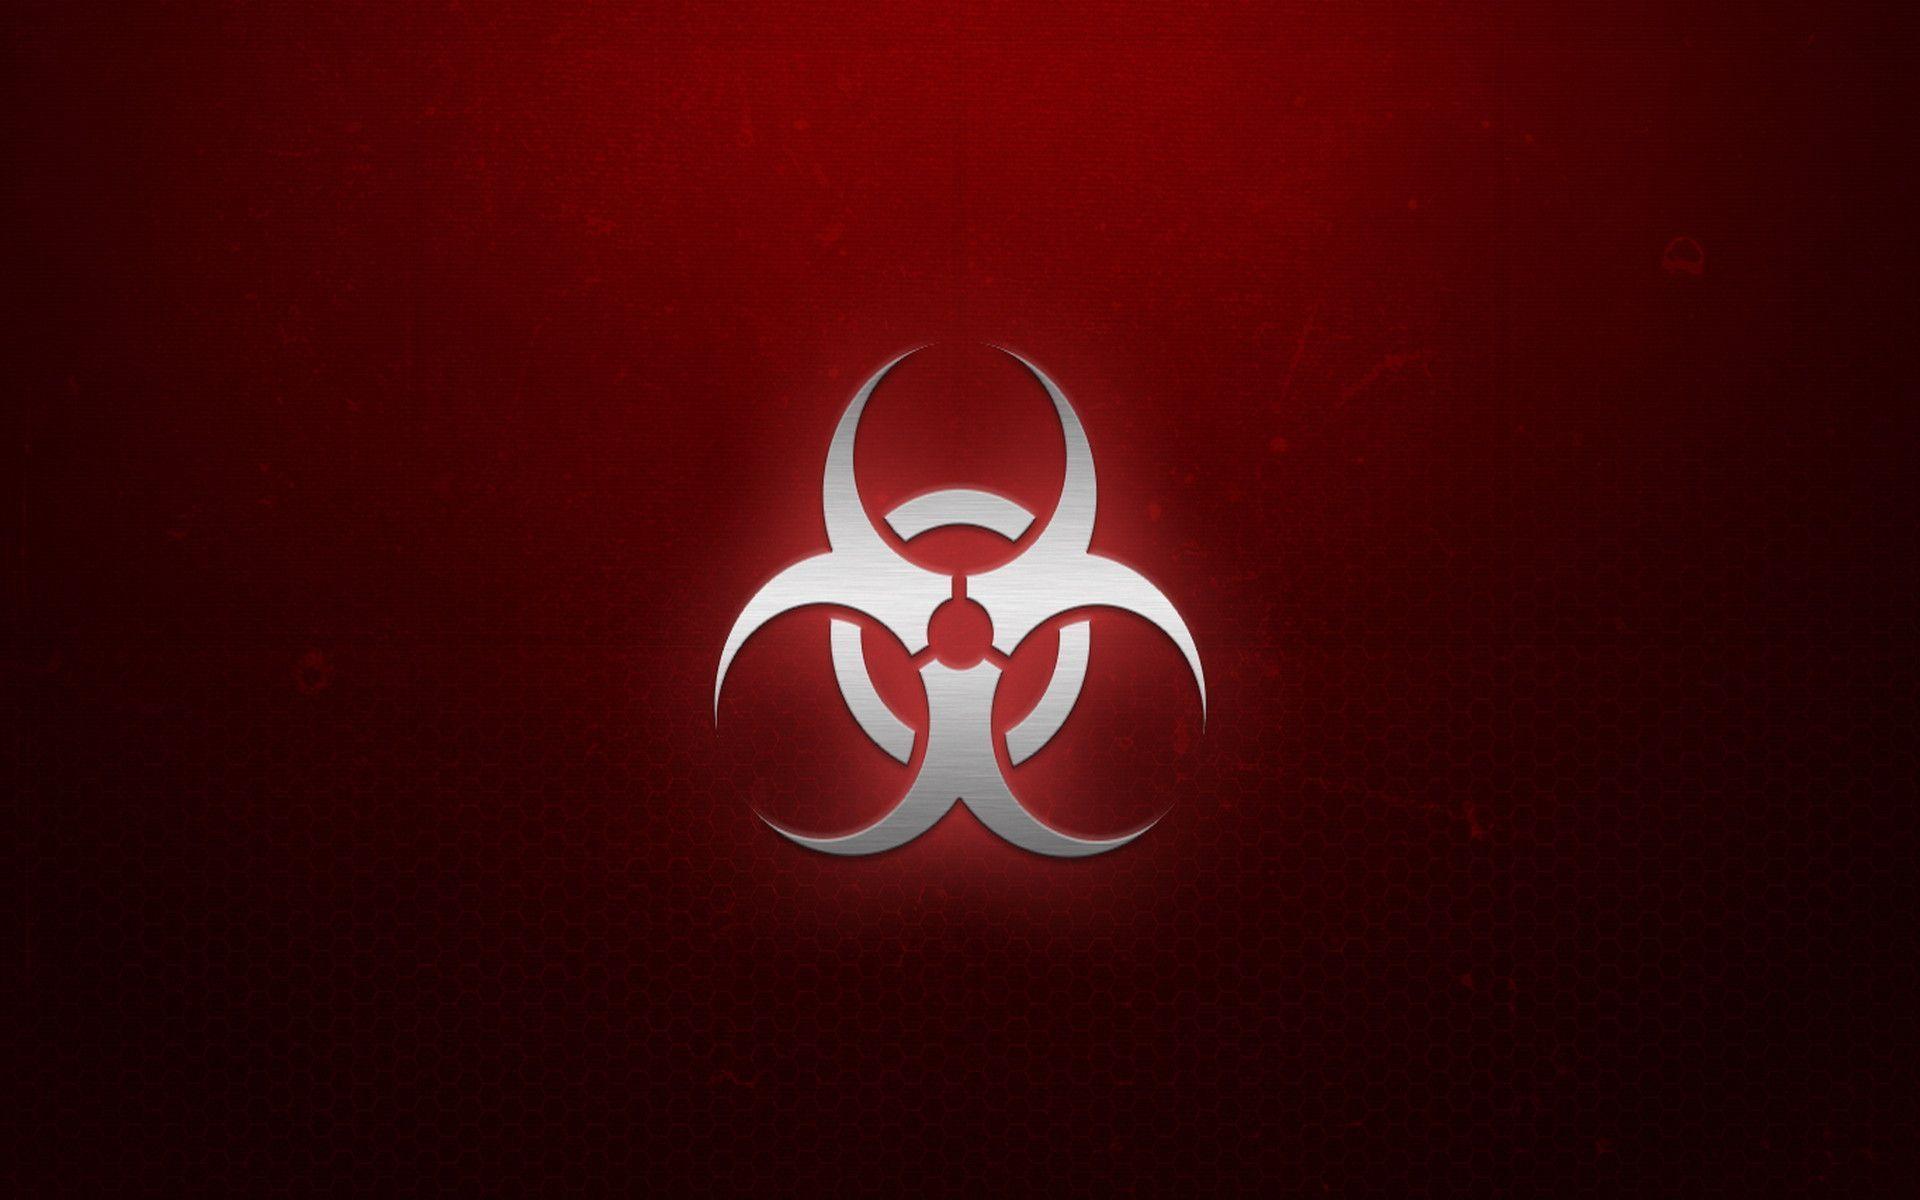 Wallpapers For > Red Biohazard Symbol Wallpapers